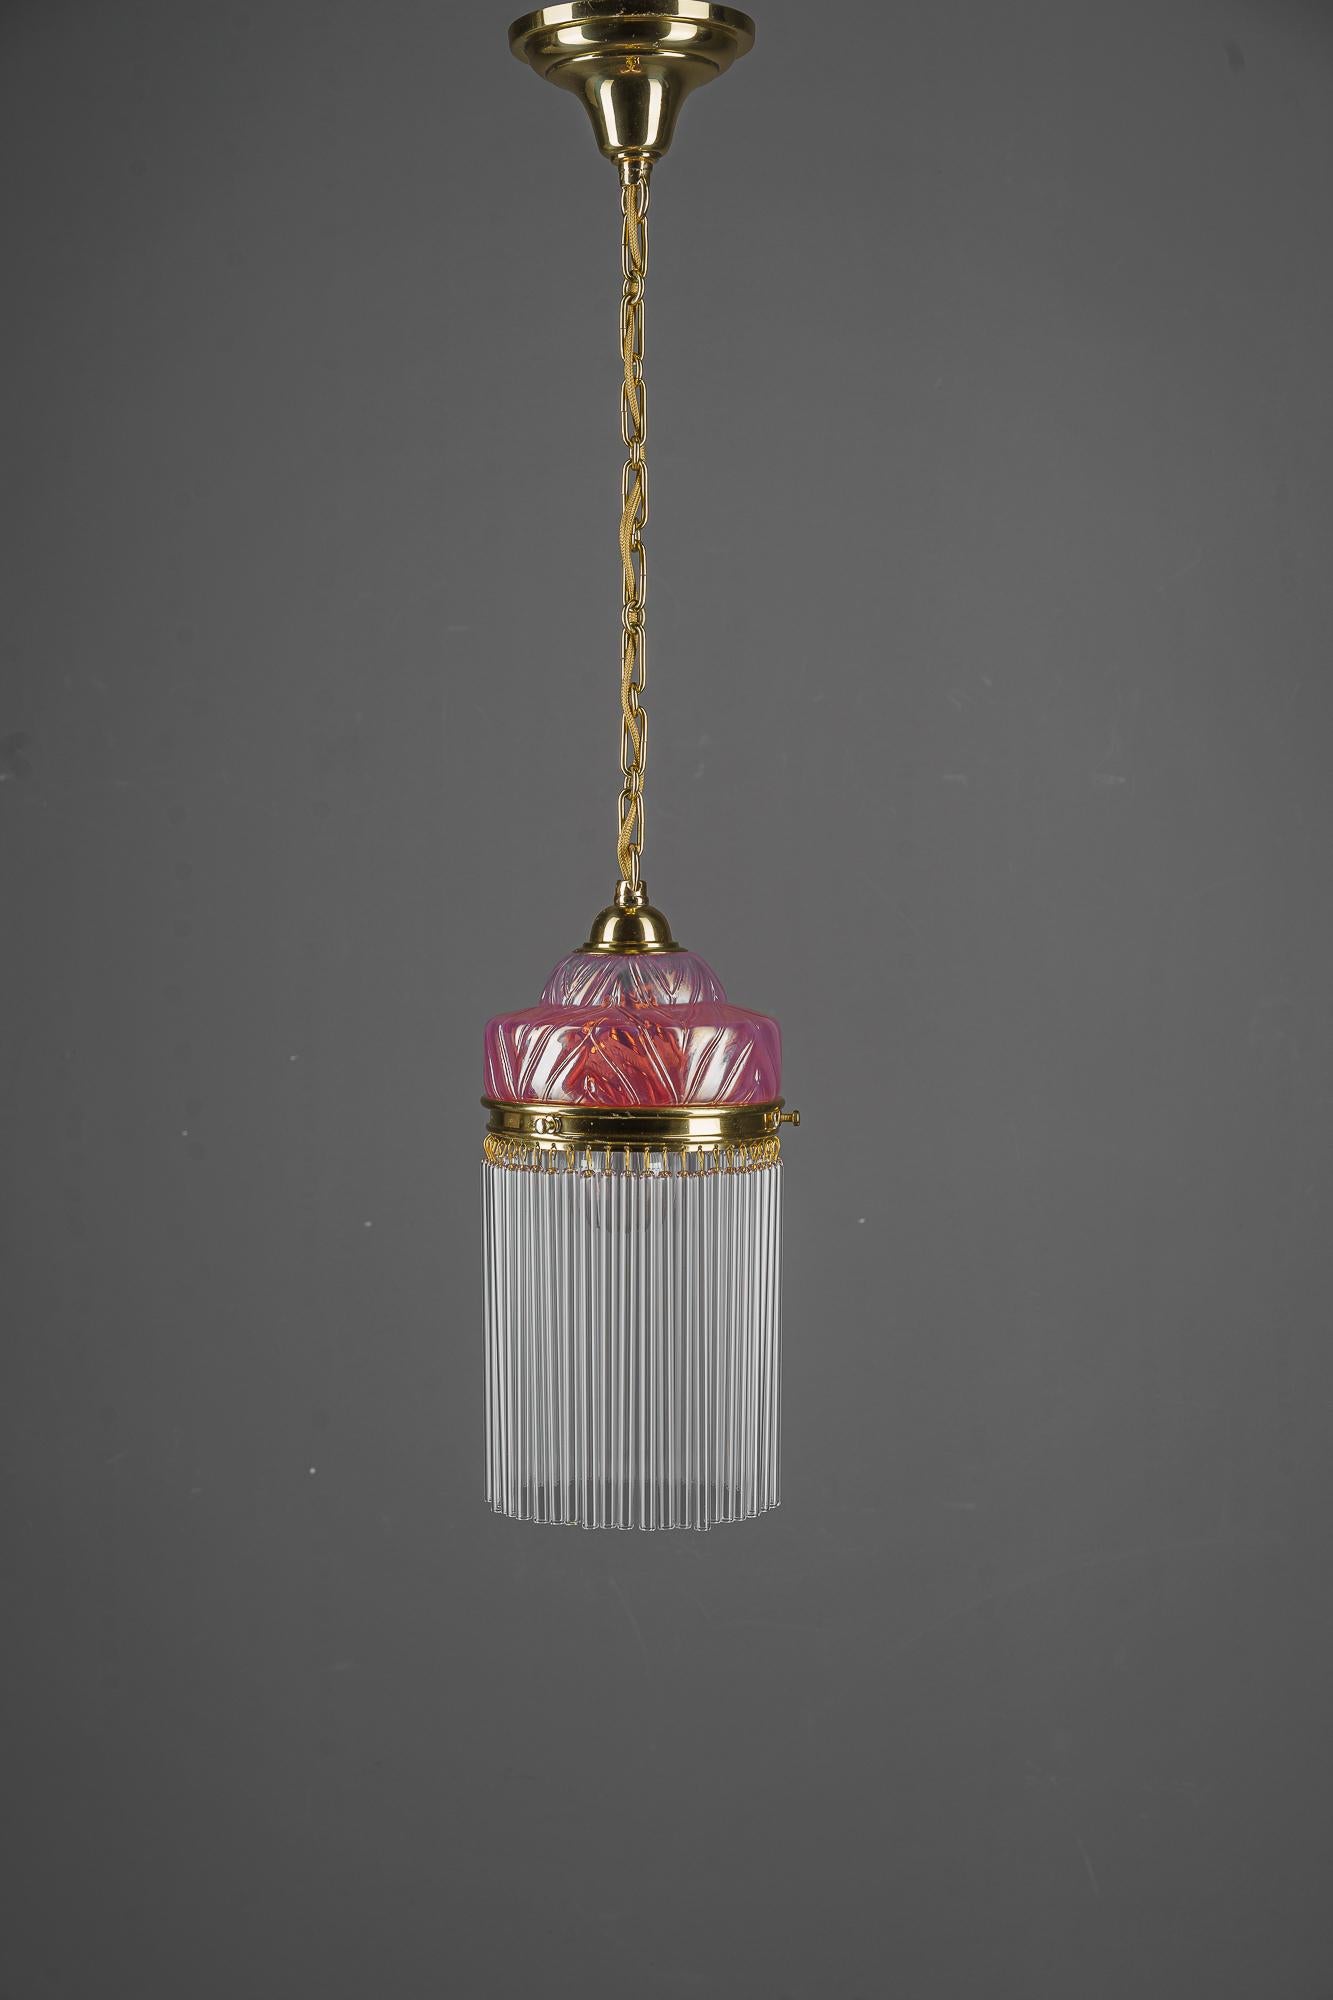 Art Deco pendant with opaline glass shade and glass sticks vienna around 1920s
Brass polished and stove enameled
Original opaline glass shade
The glass sticks are replaced ( new )